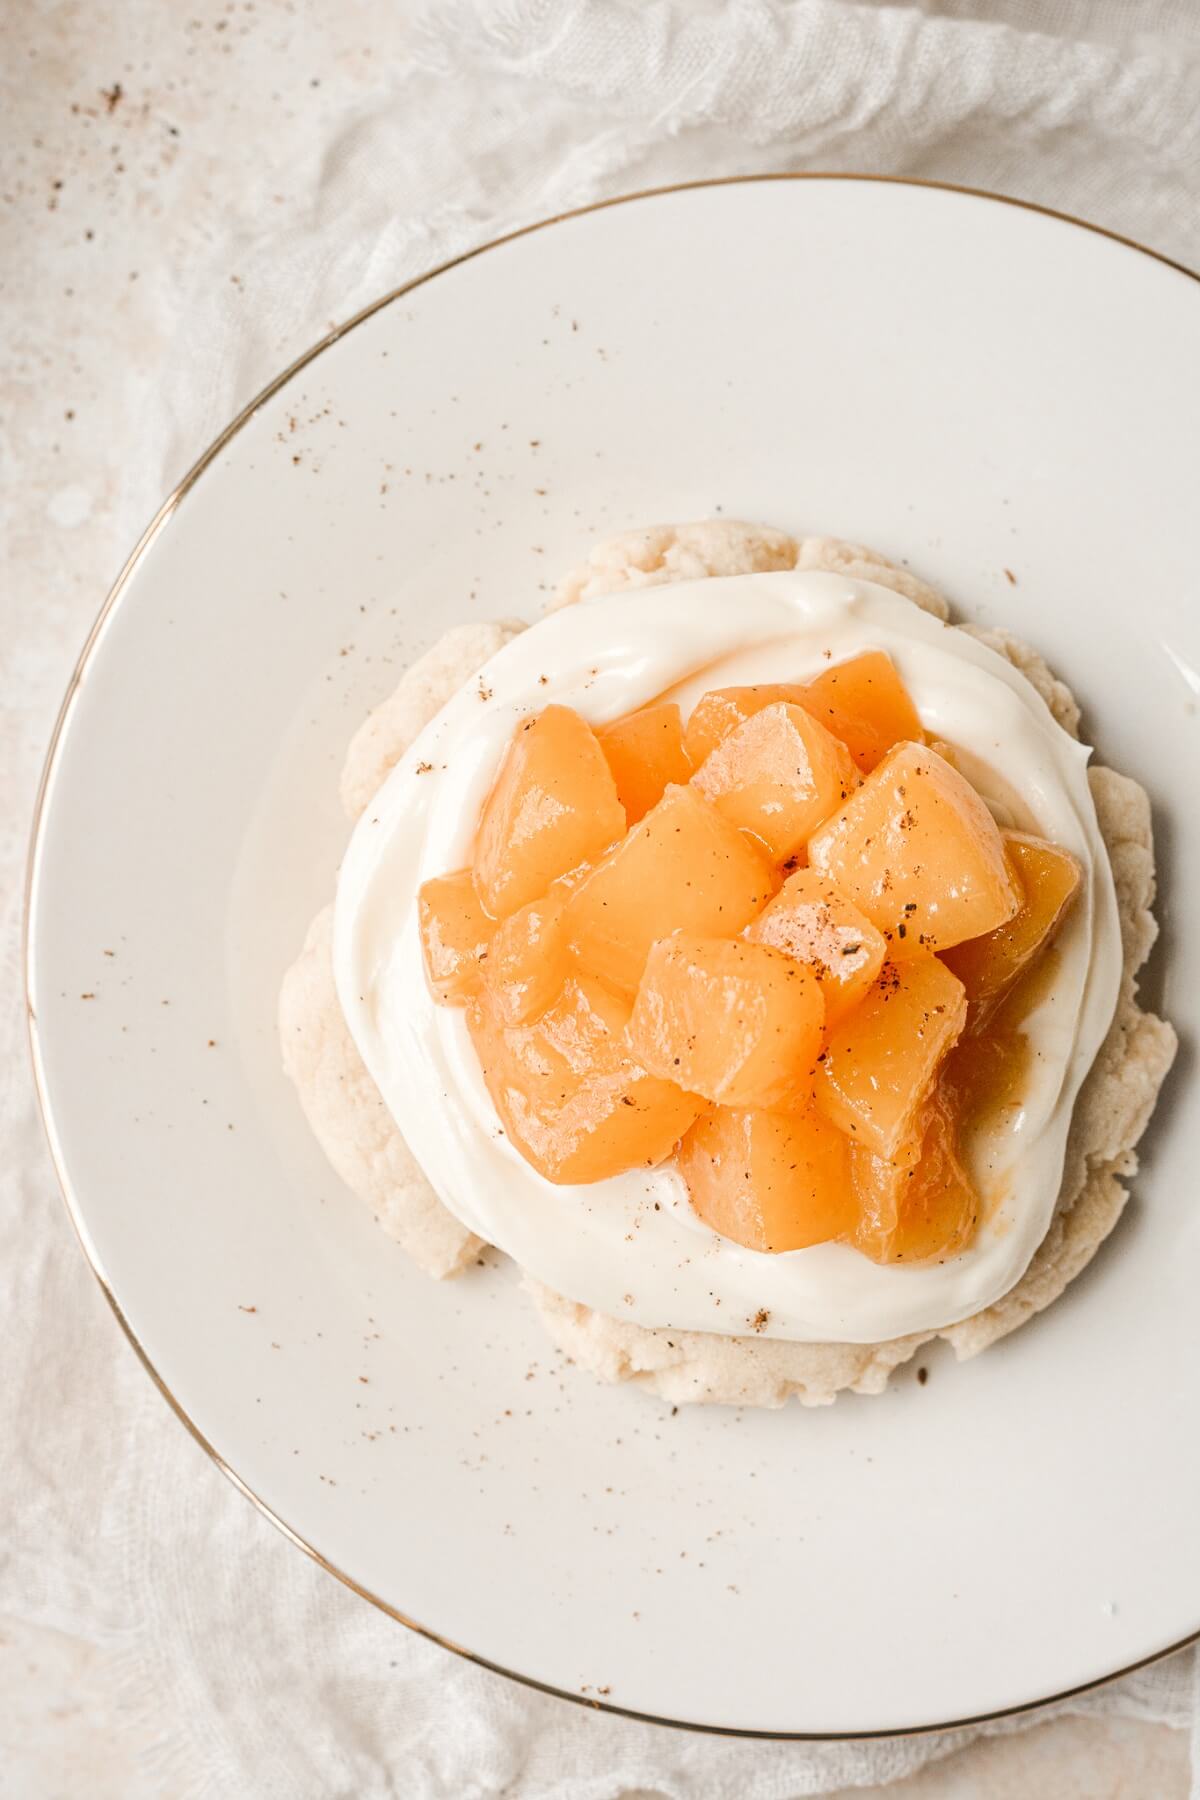 A sugar cookie topped with cream cheese and peach compote.